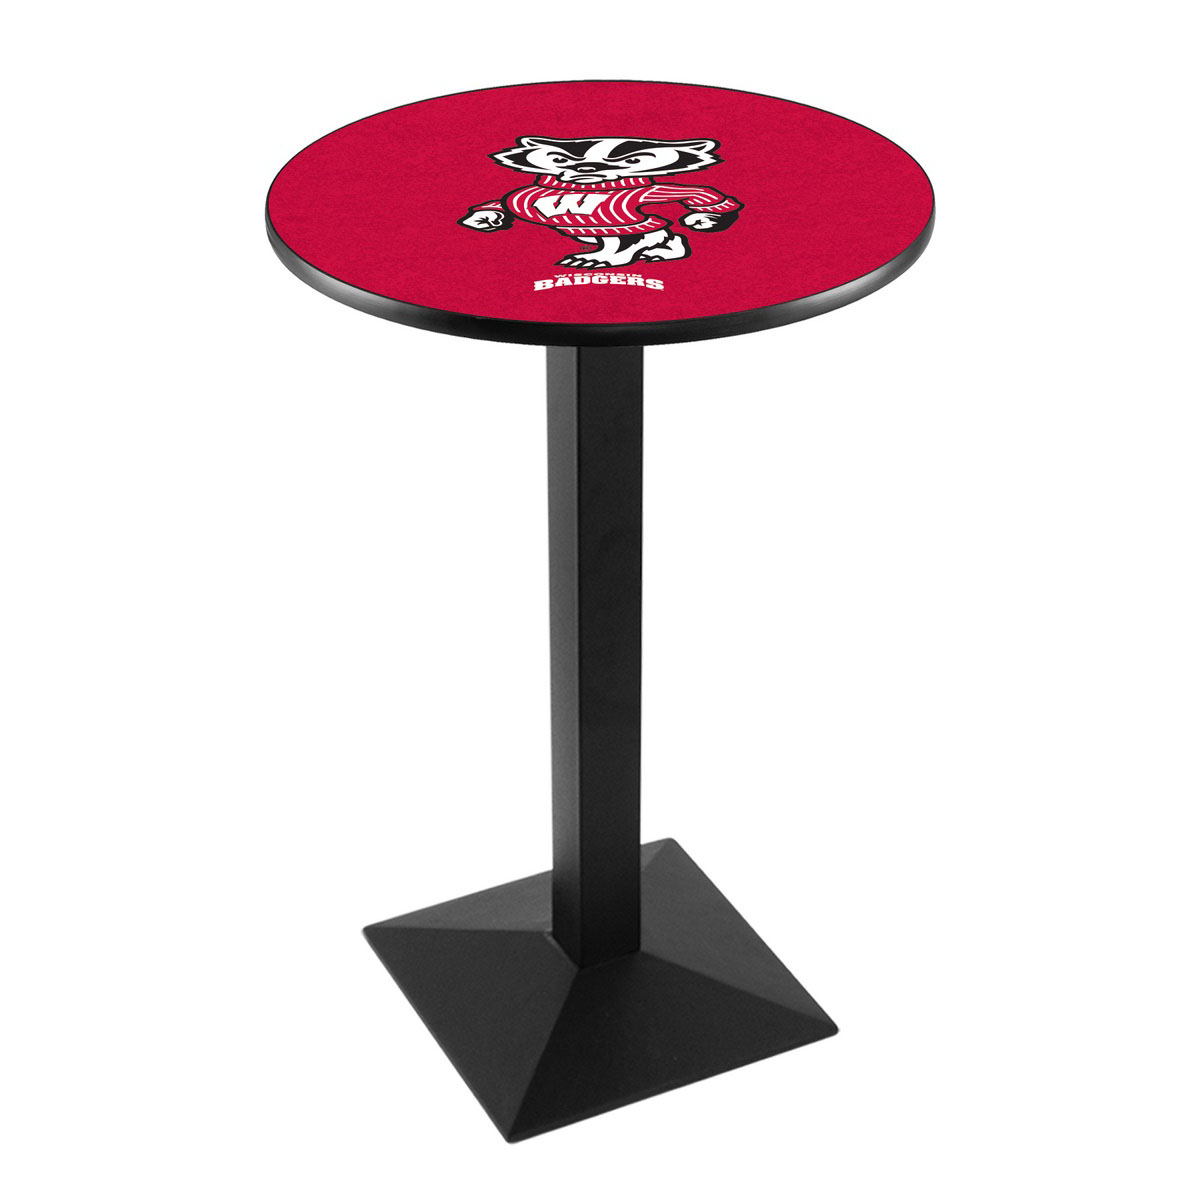 University Of Wisconsin (badger) Logo Pub Bar Table With Square Stand